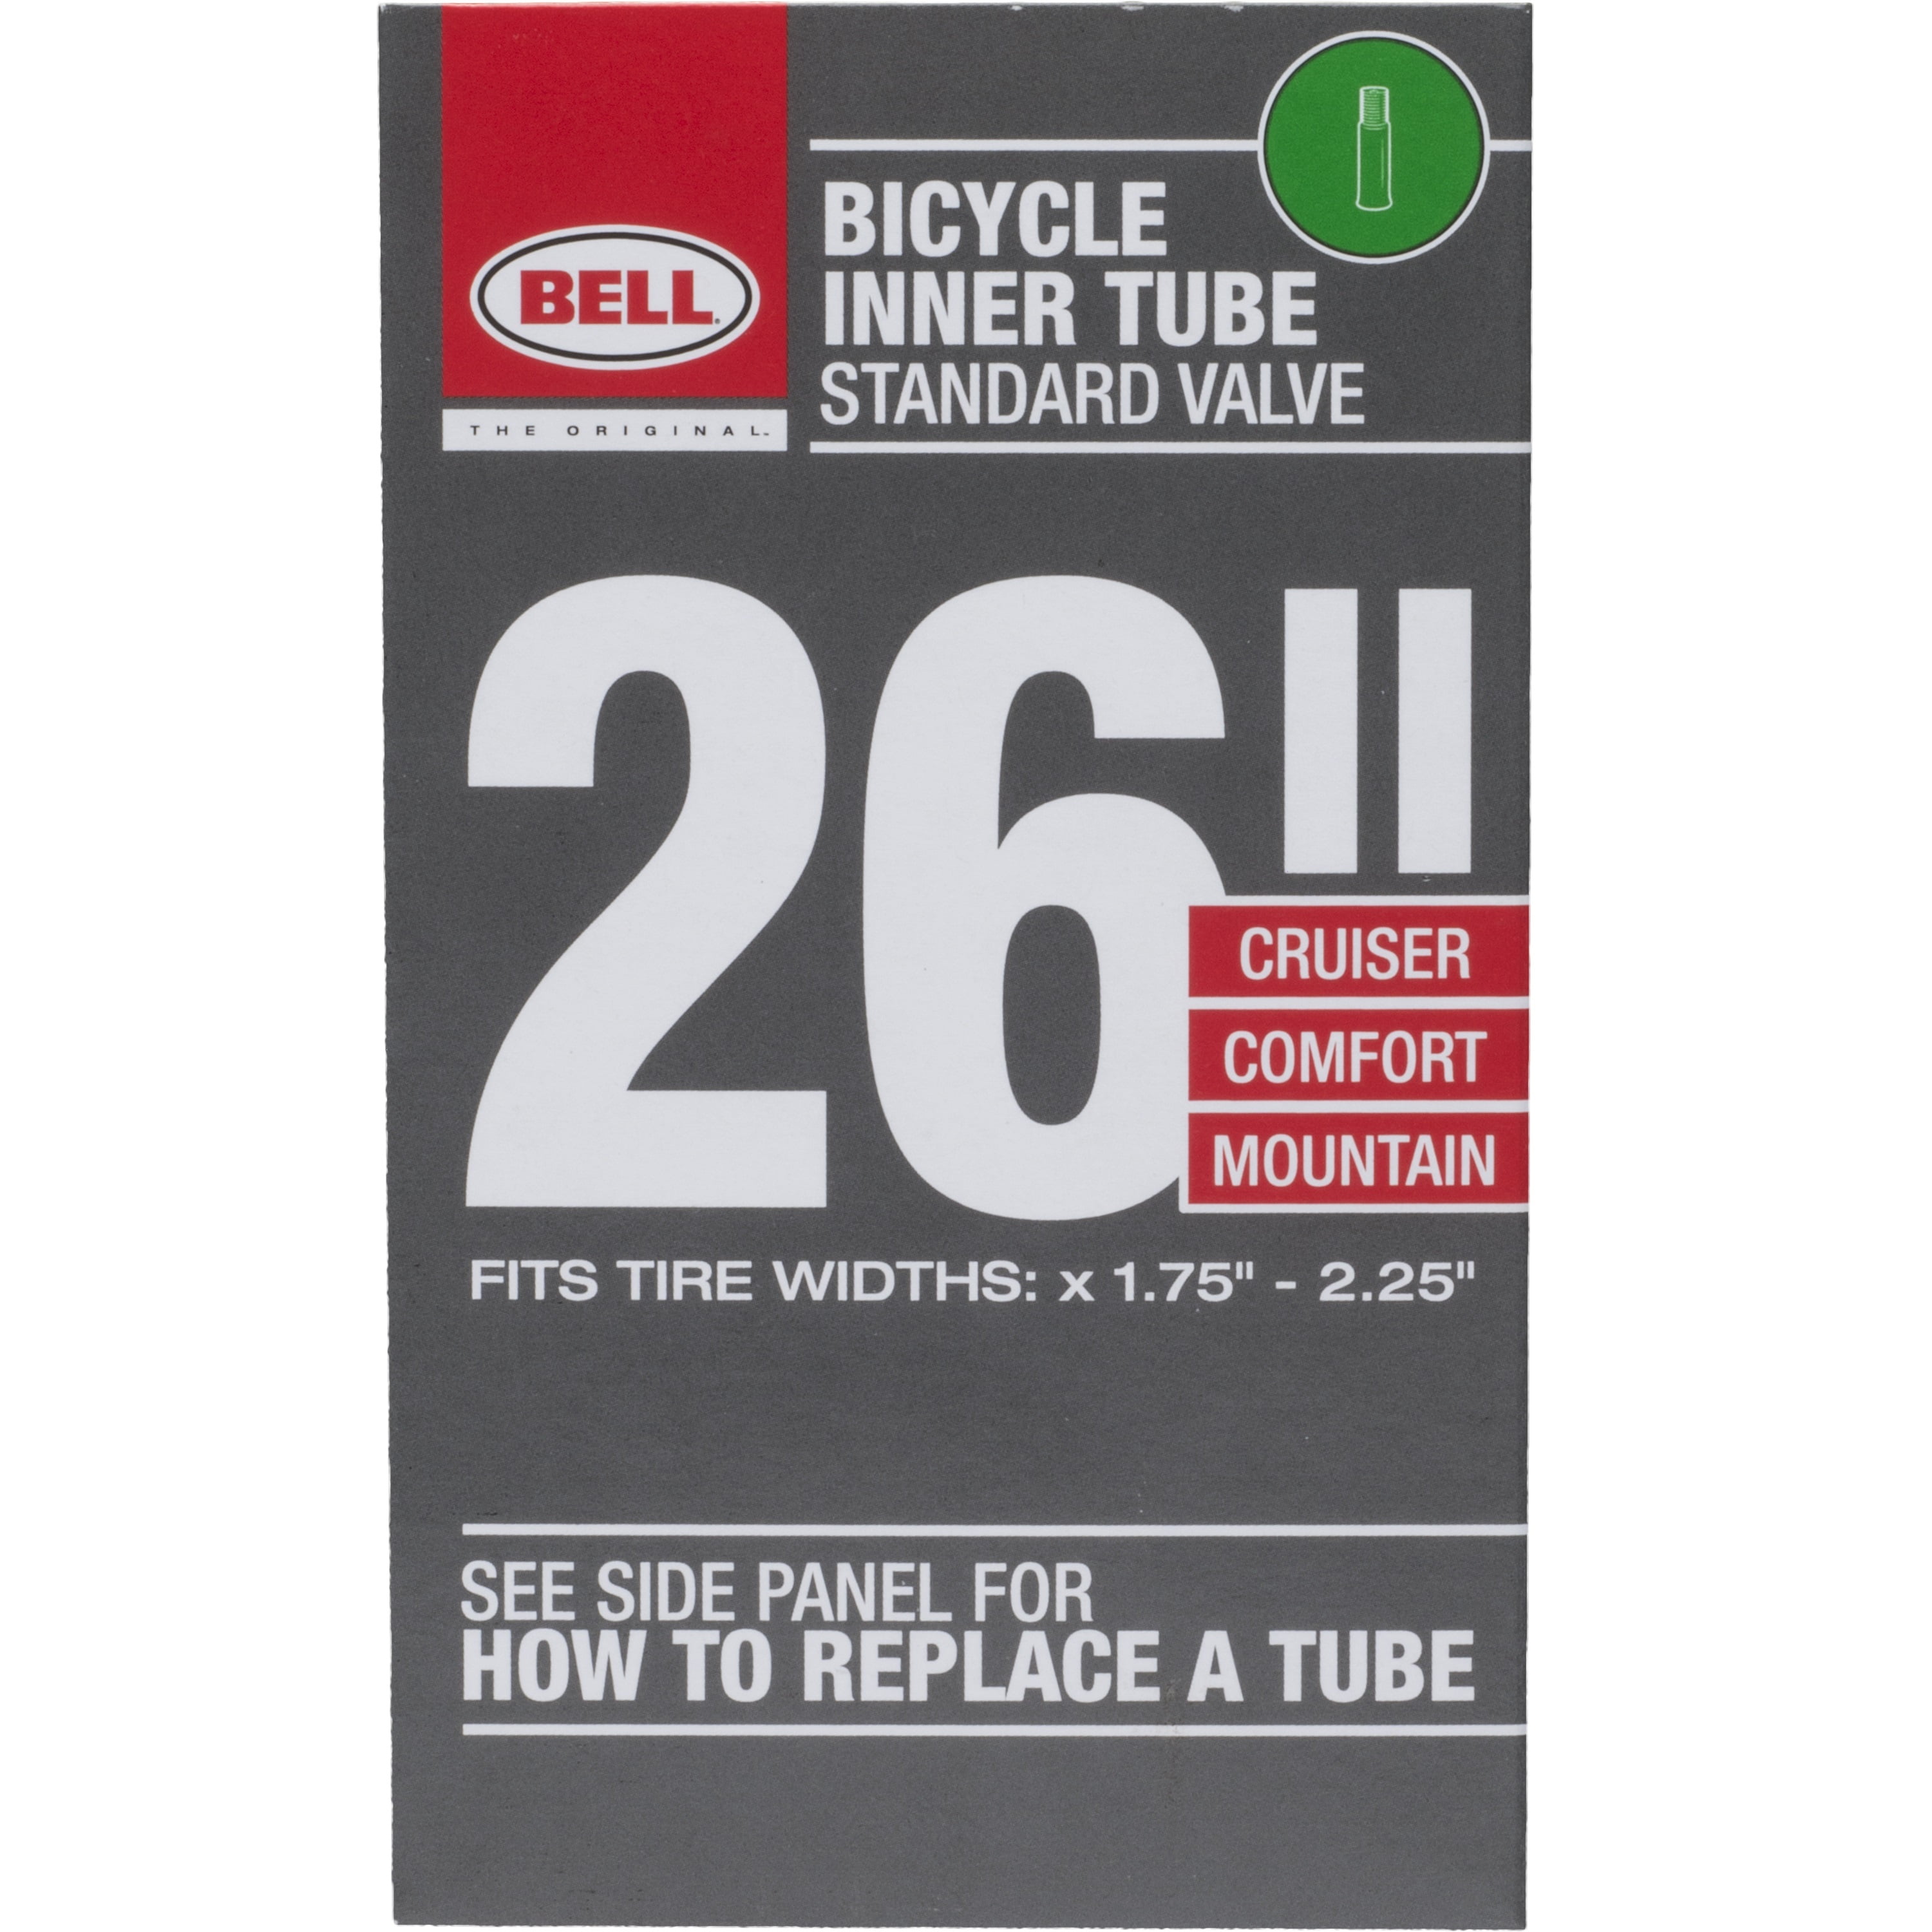 Lot of 2 Bell Bike Bicycle 20” Inner Tube Fits Tire Widths 1.75"-2.25" Standard 